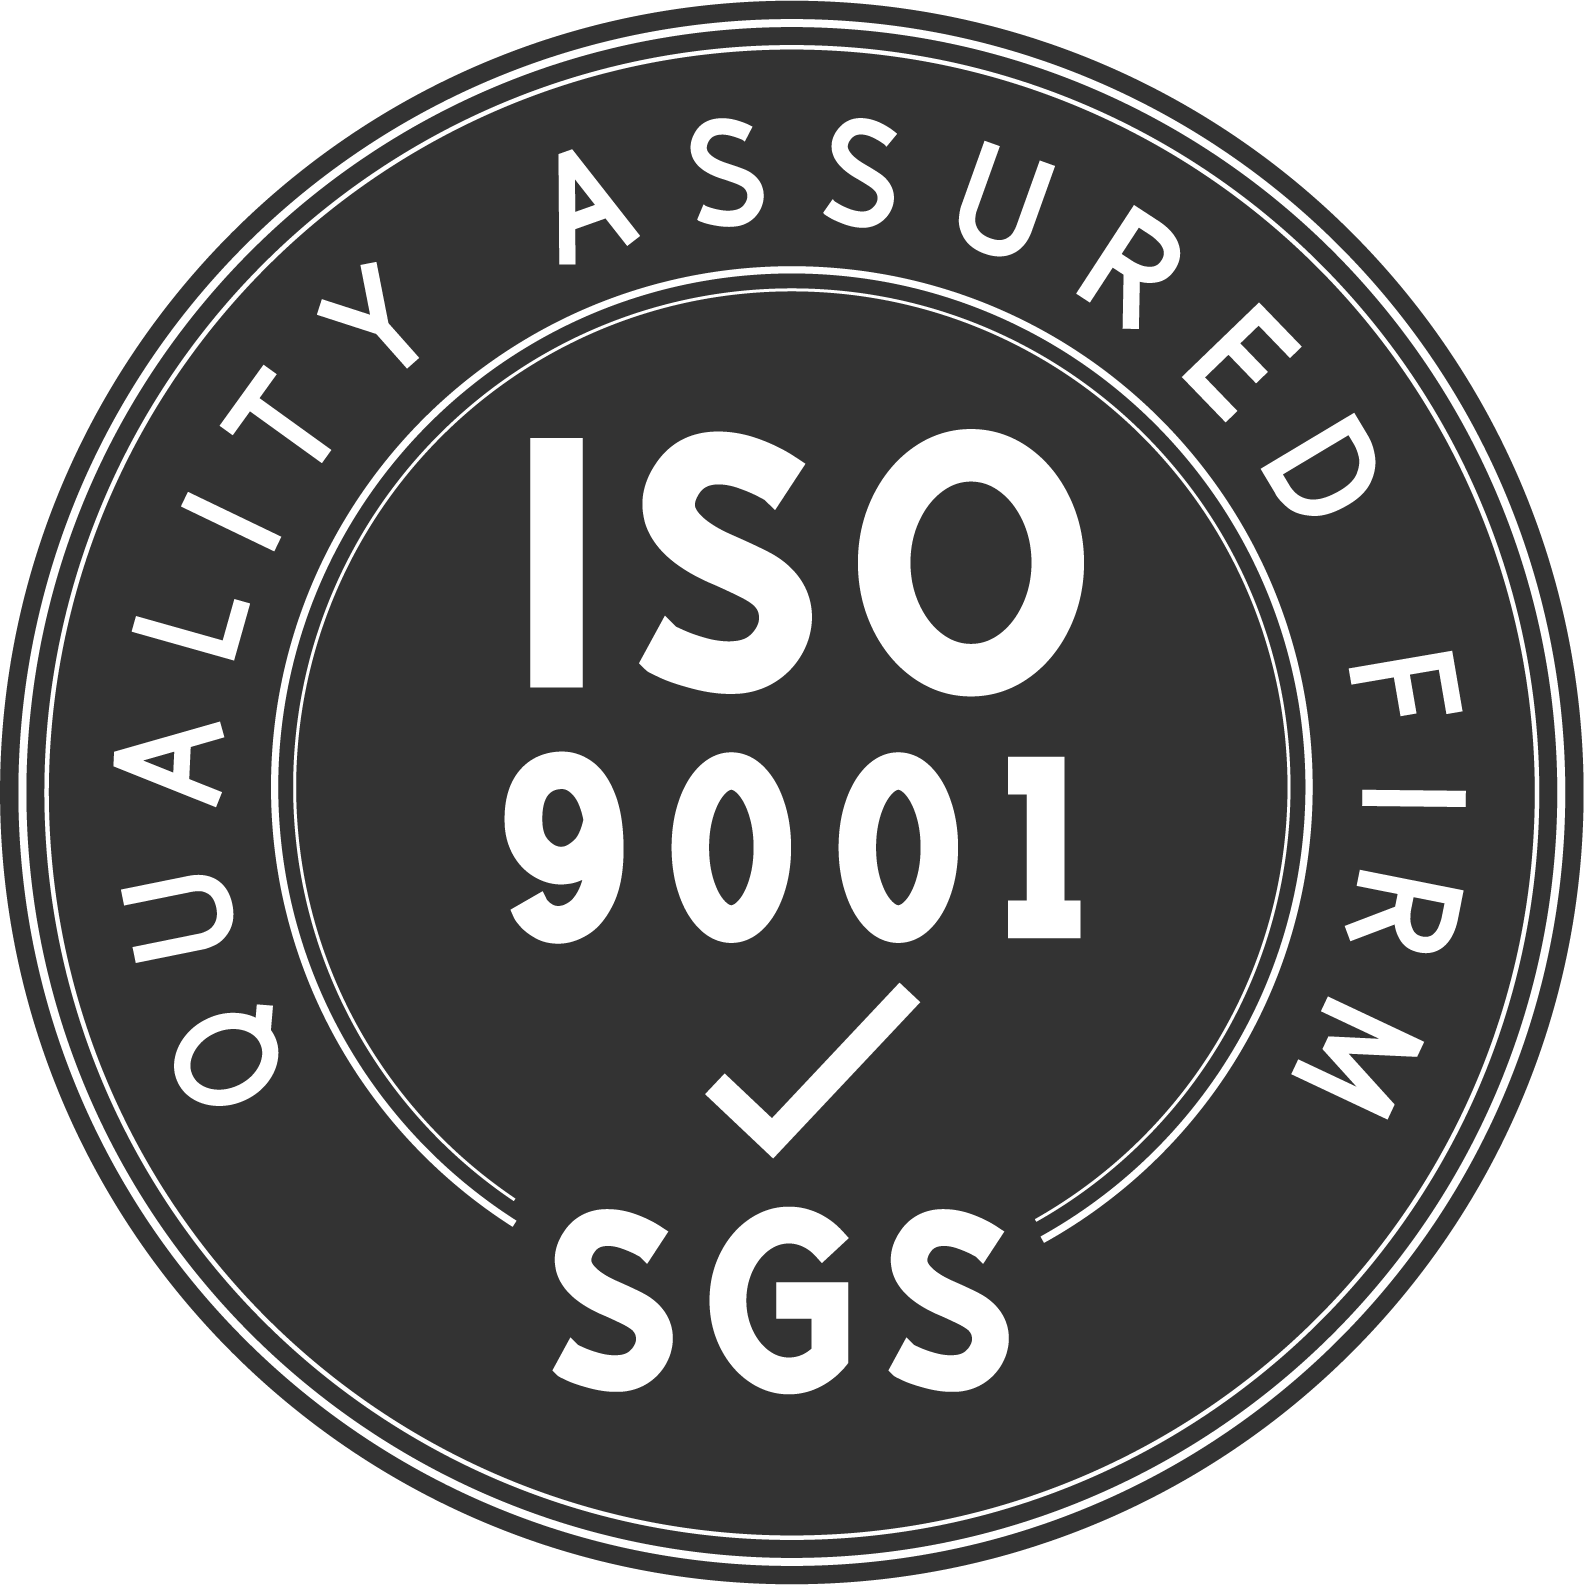 Our factory is ISO9001:2005 certified manufacturer of high quality products